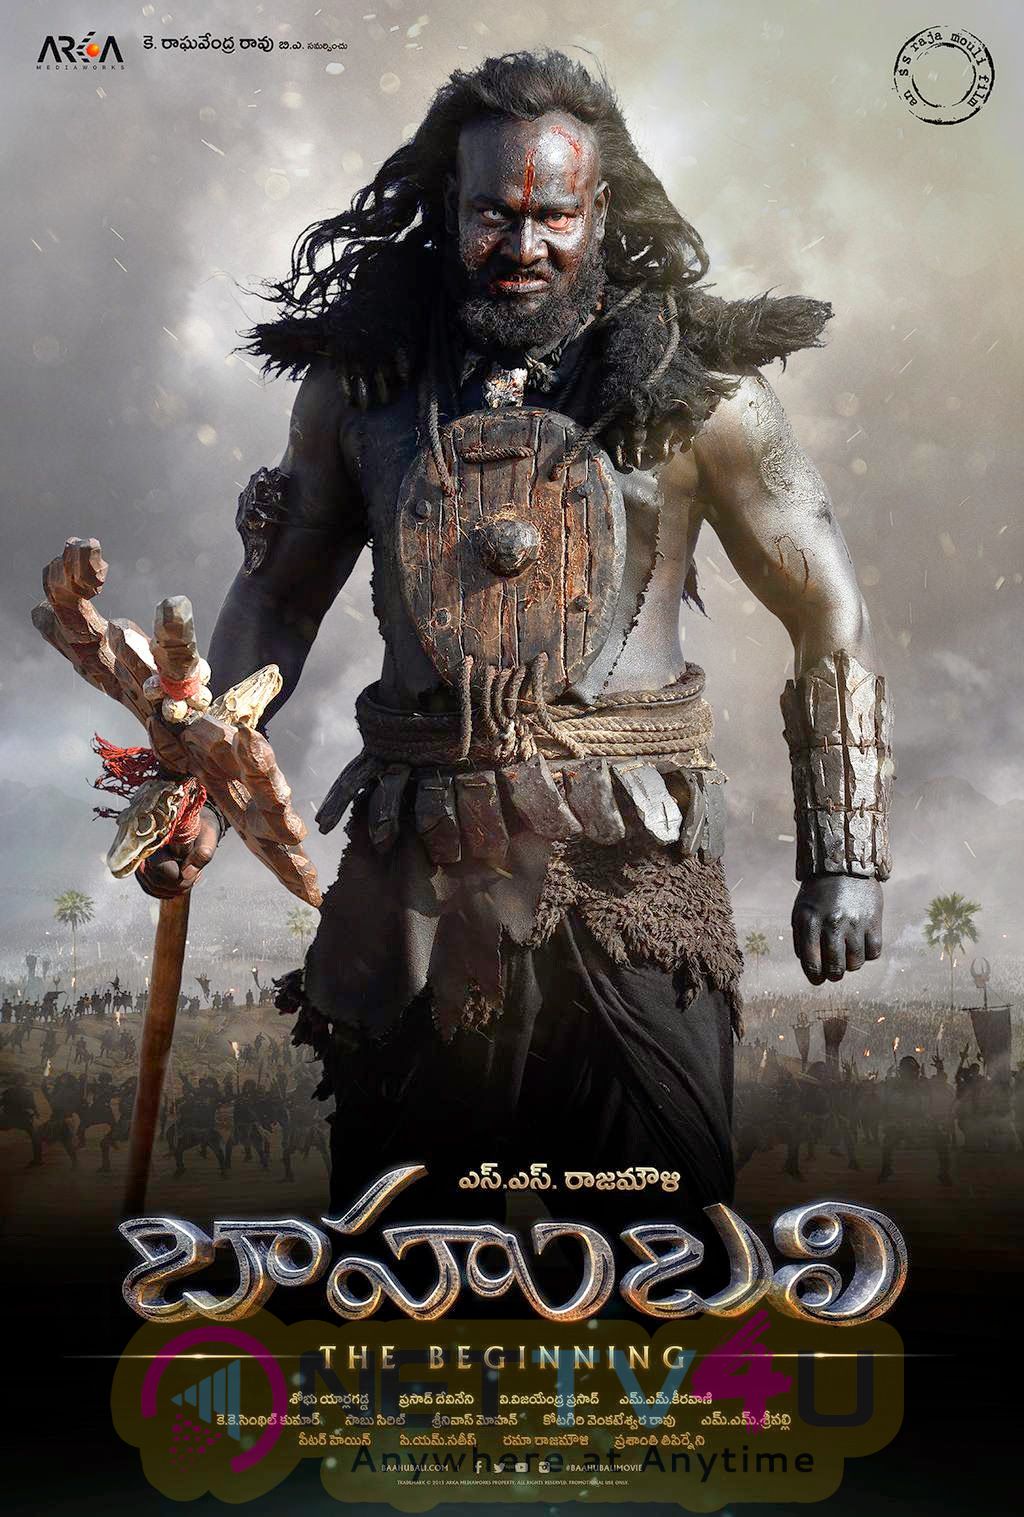 wallpapers and posters for baahubali telugu movie 30 days 14